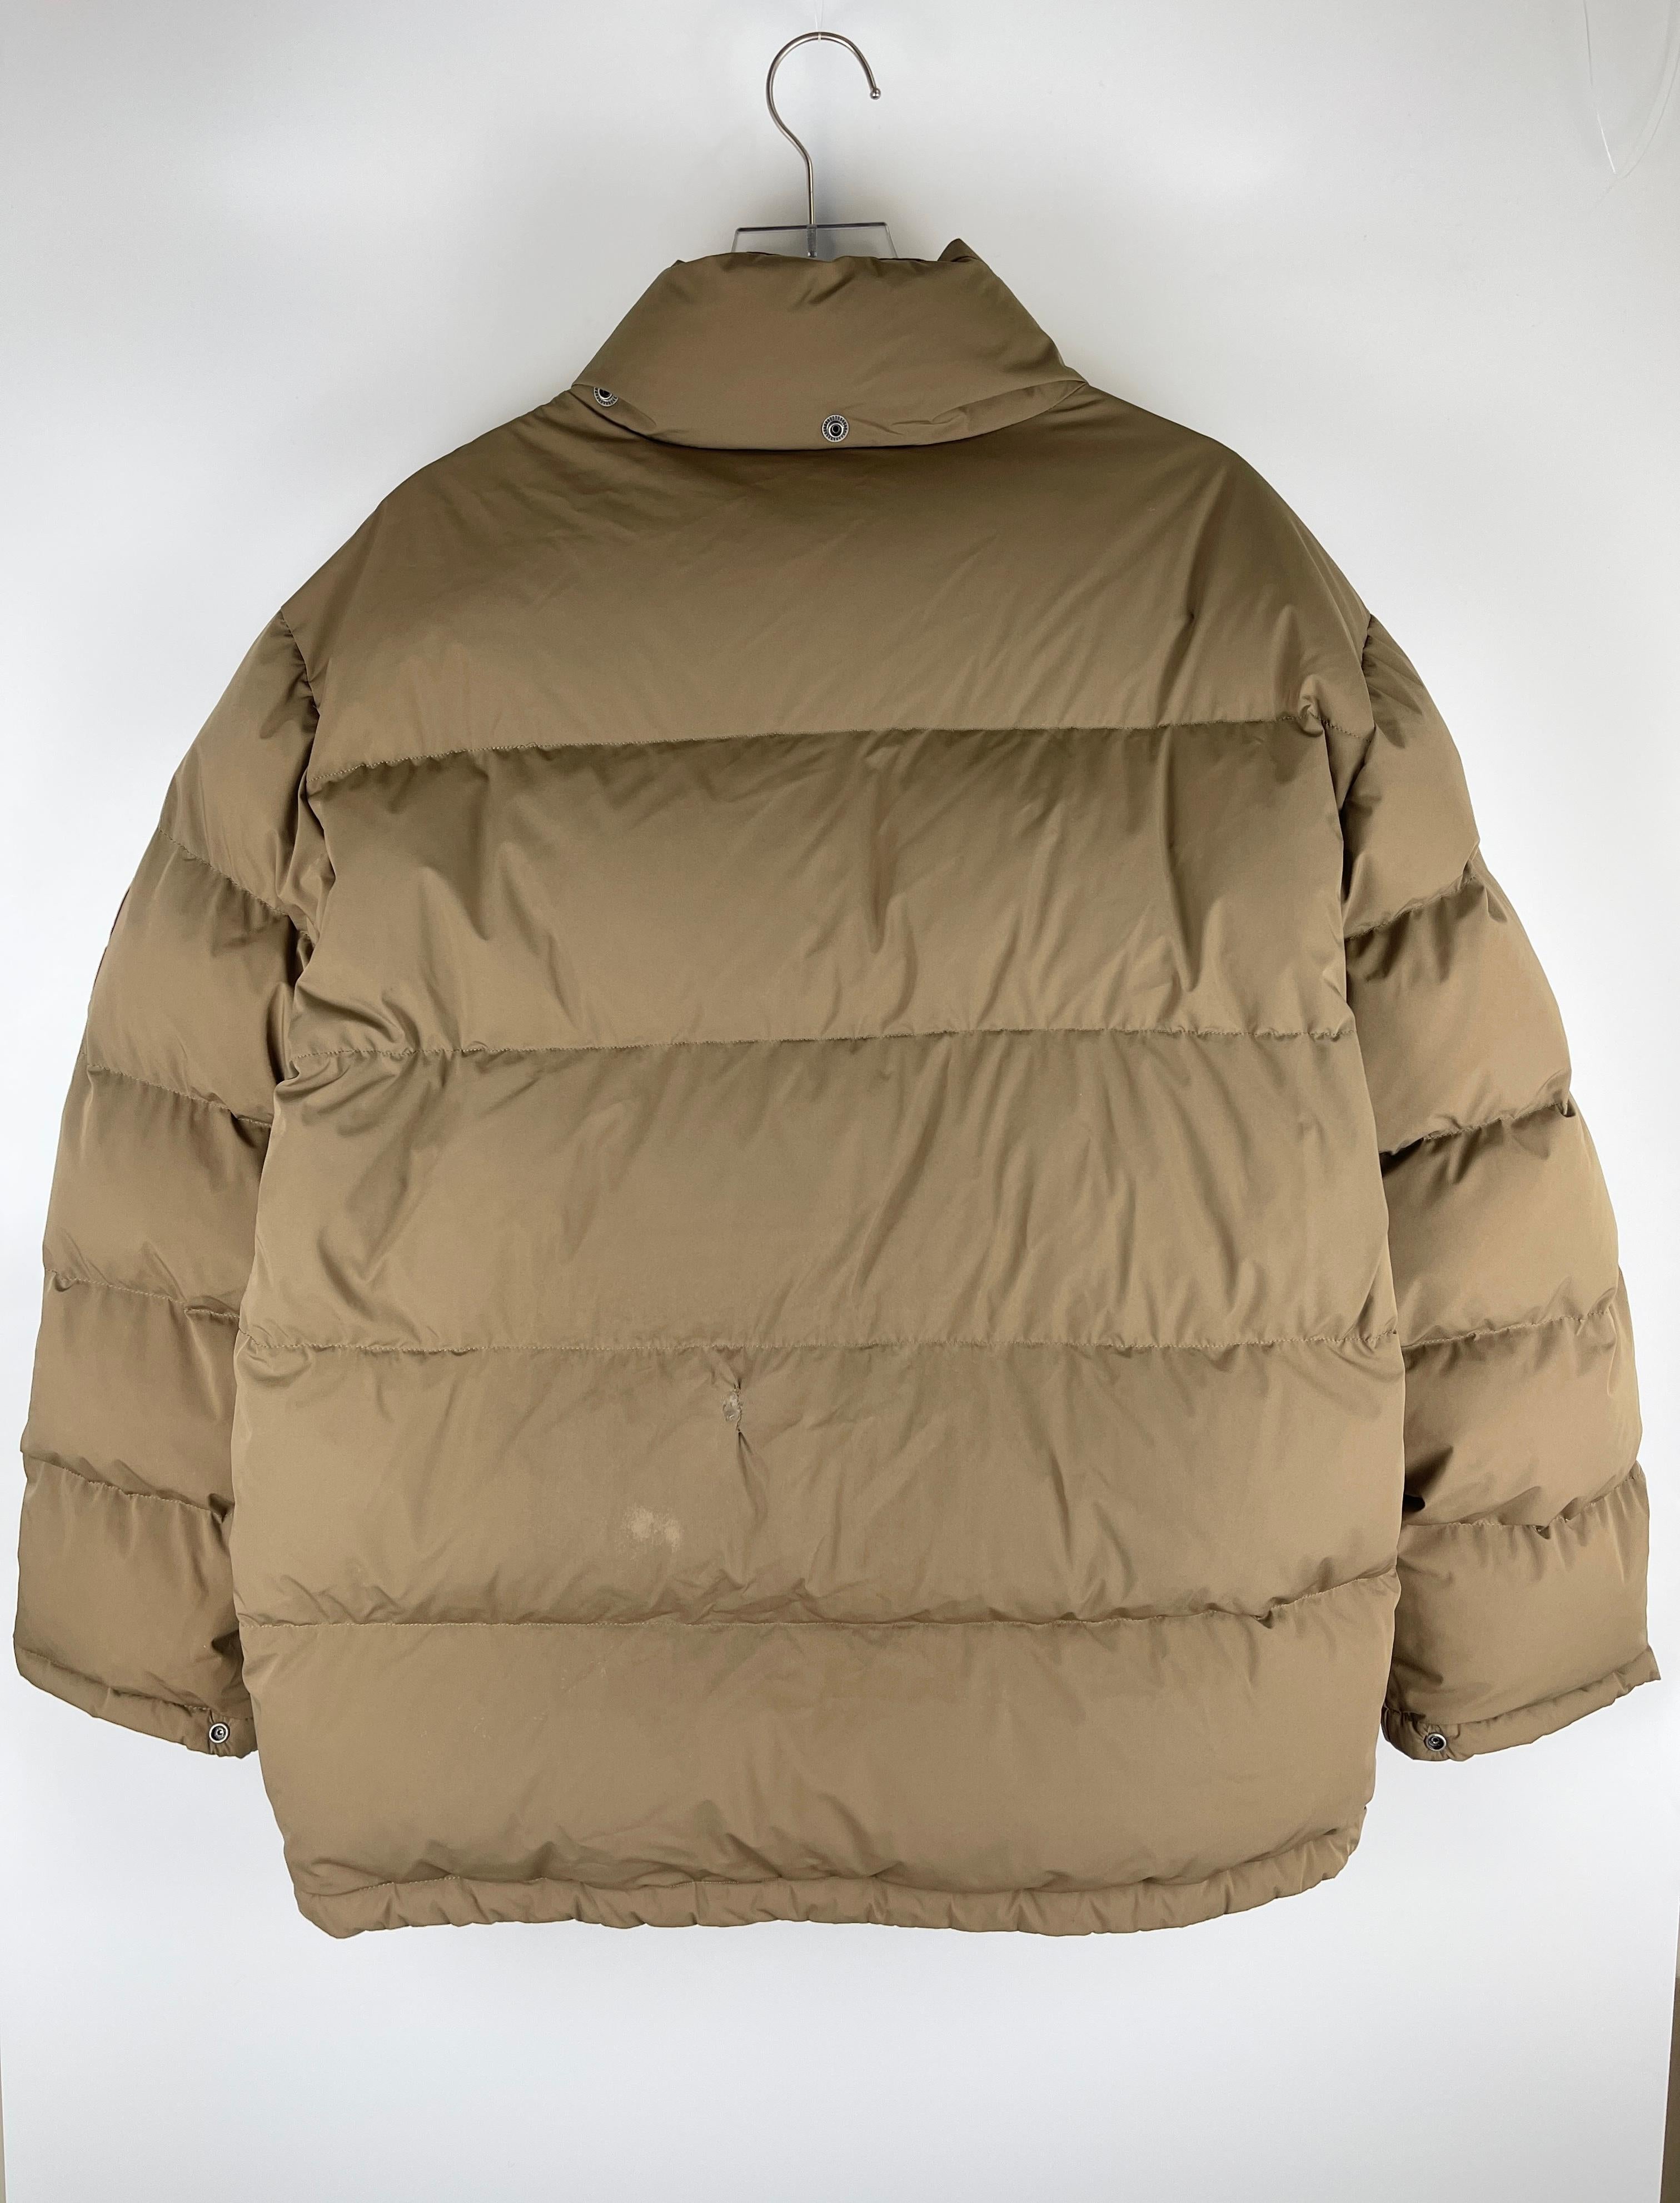 Gucci x The North Face Nuptse Goose Down Jacket For Sale 1